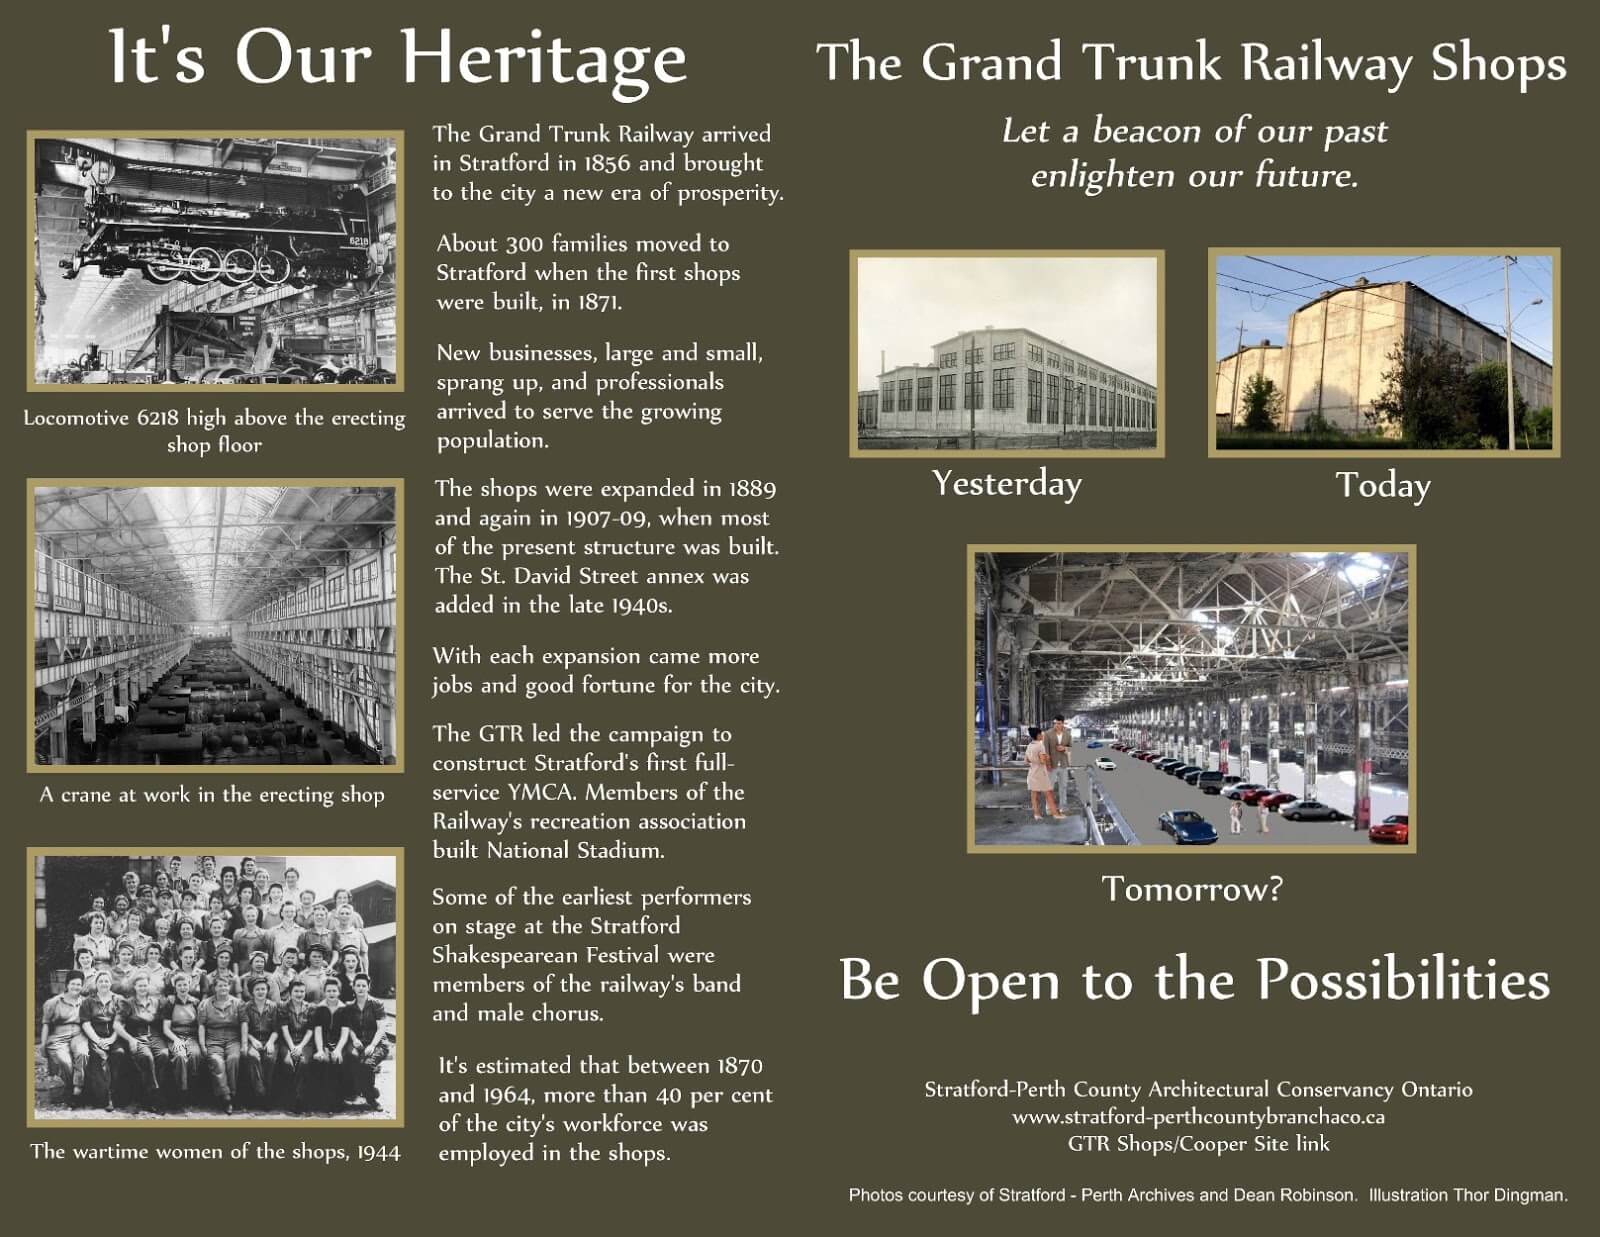 A flyer promoting the Grand Trunk Railway Shops and the affiliated heritage